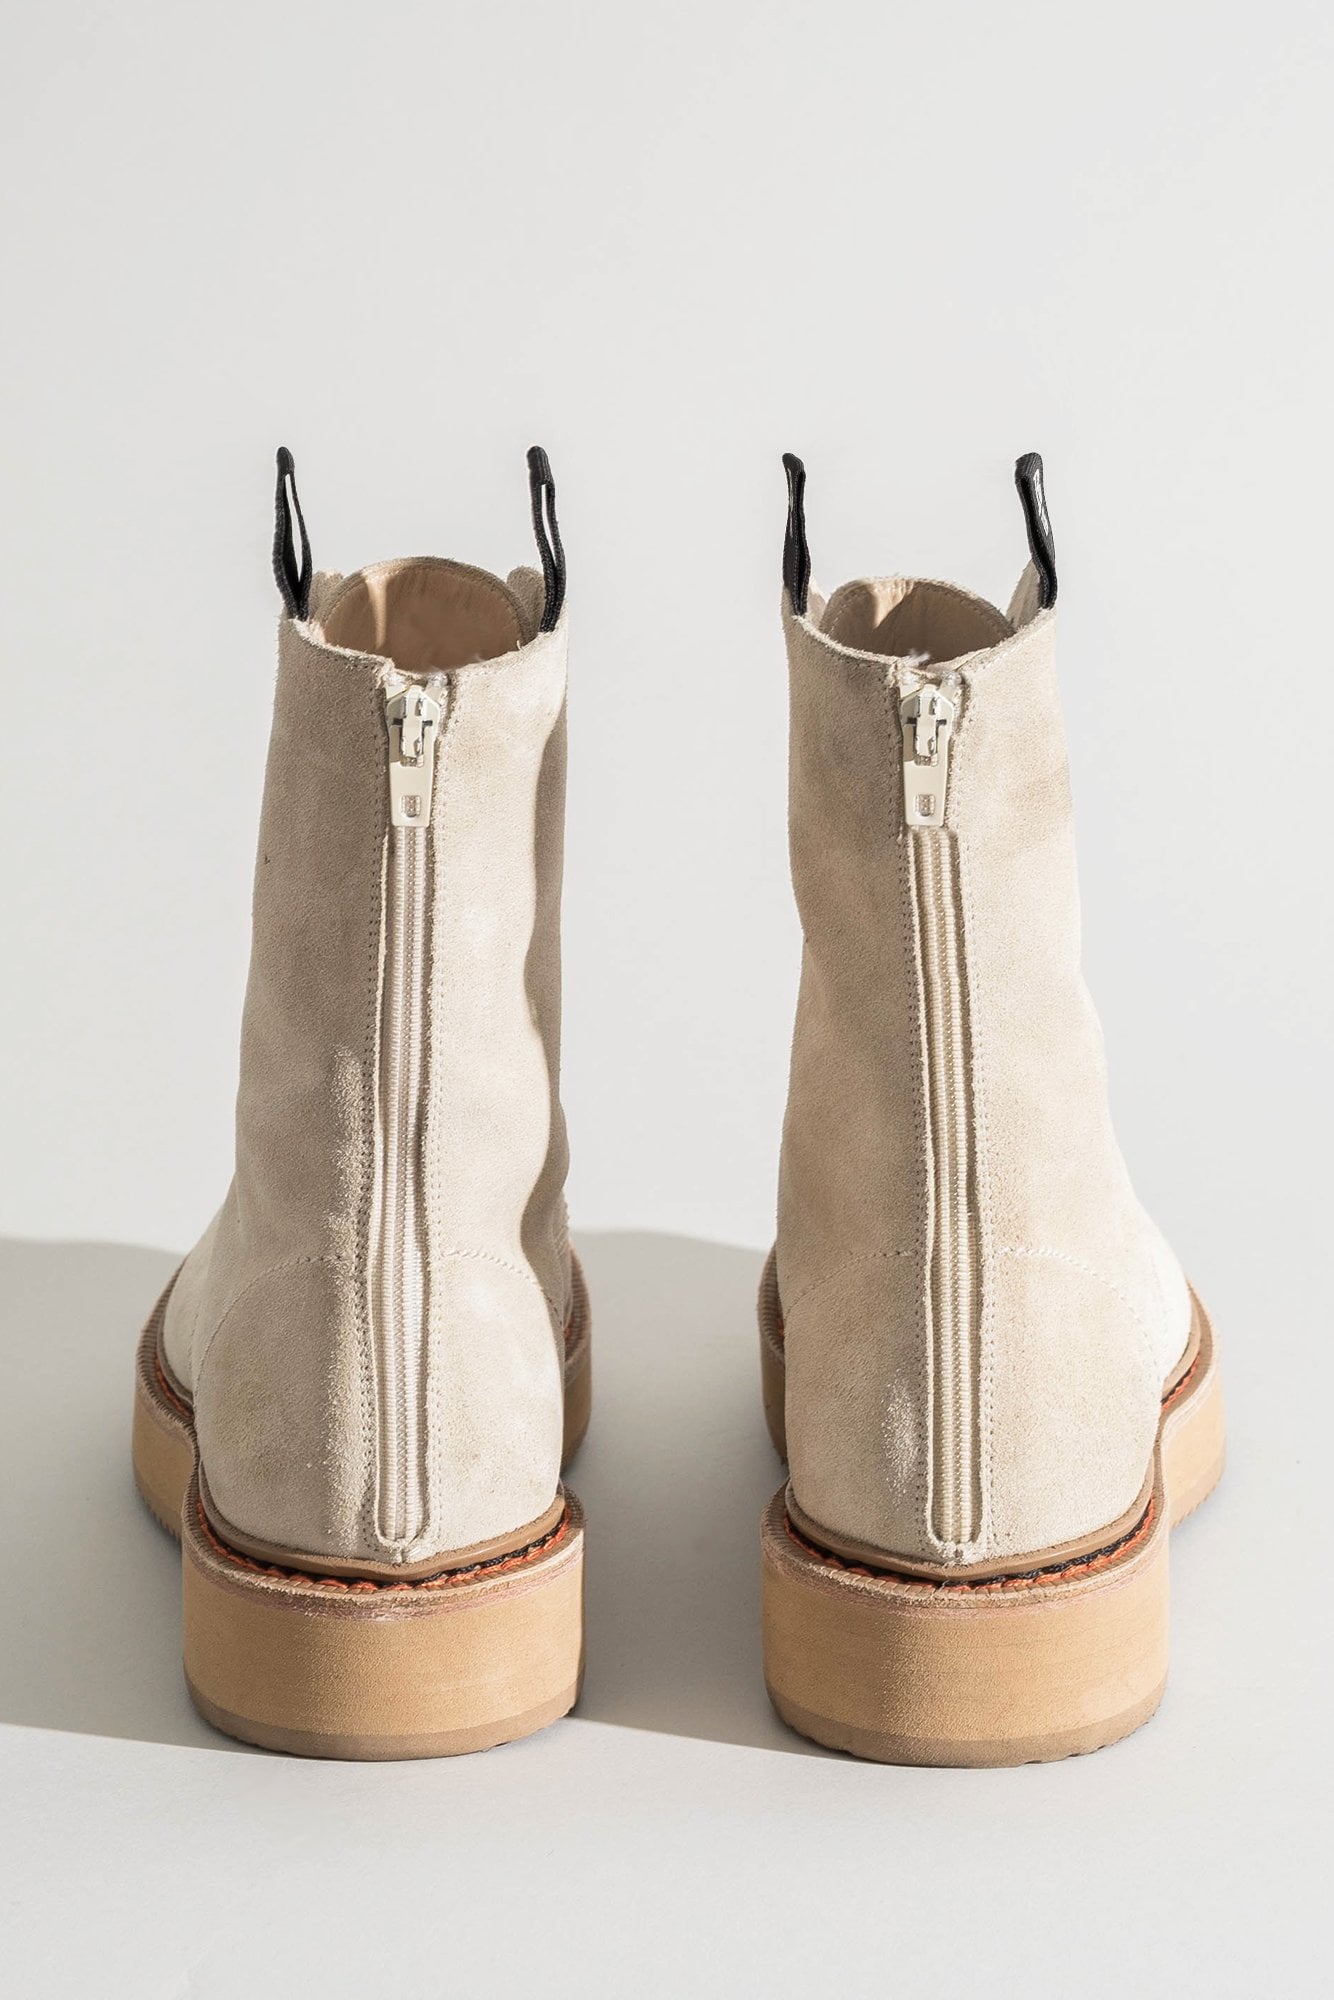 SINGLE STACK BOOT - KHAKI SUEDE